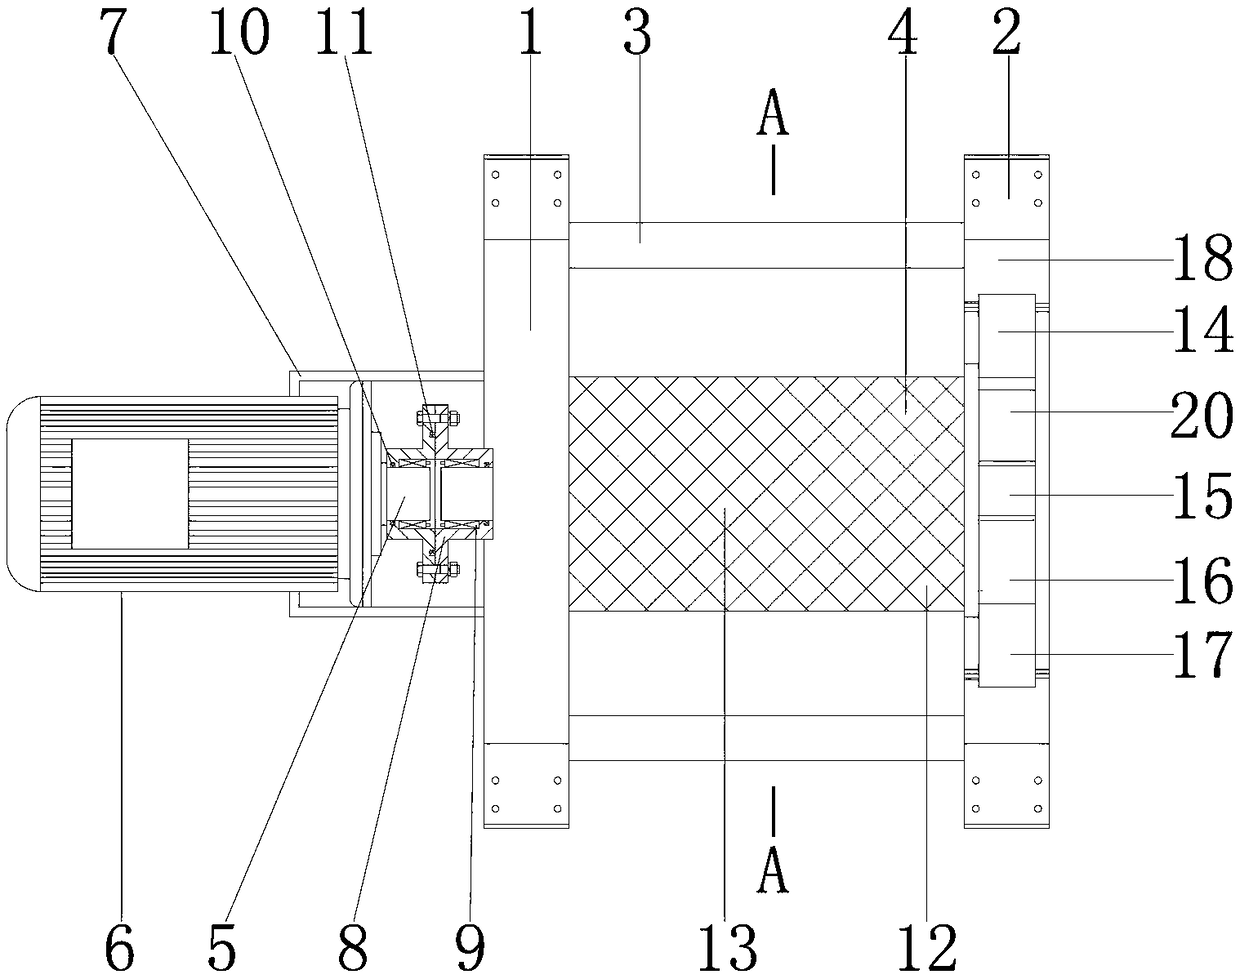 Novel single-blade wheel type power generation device for electricity company